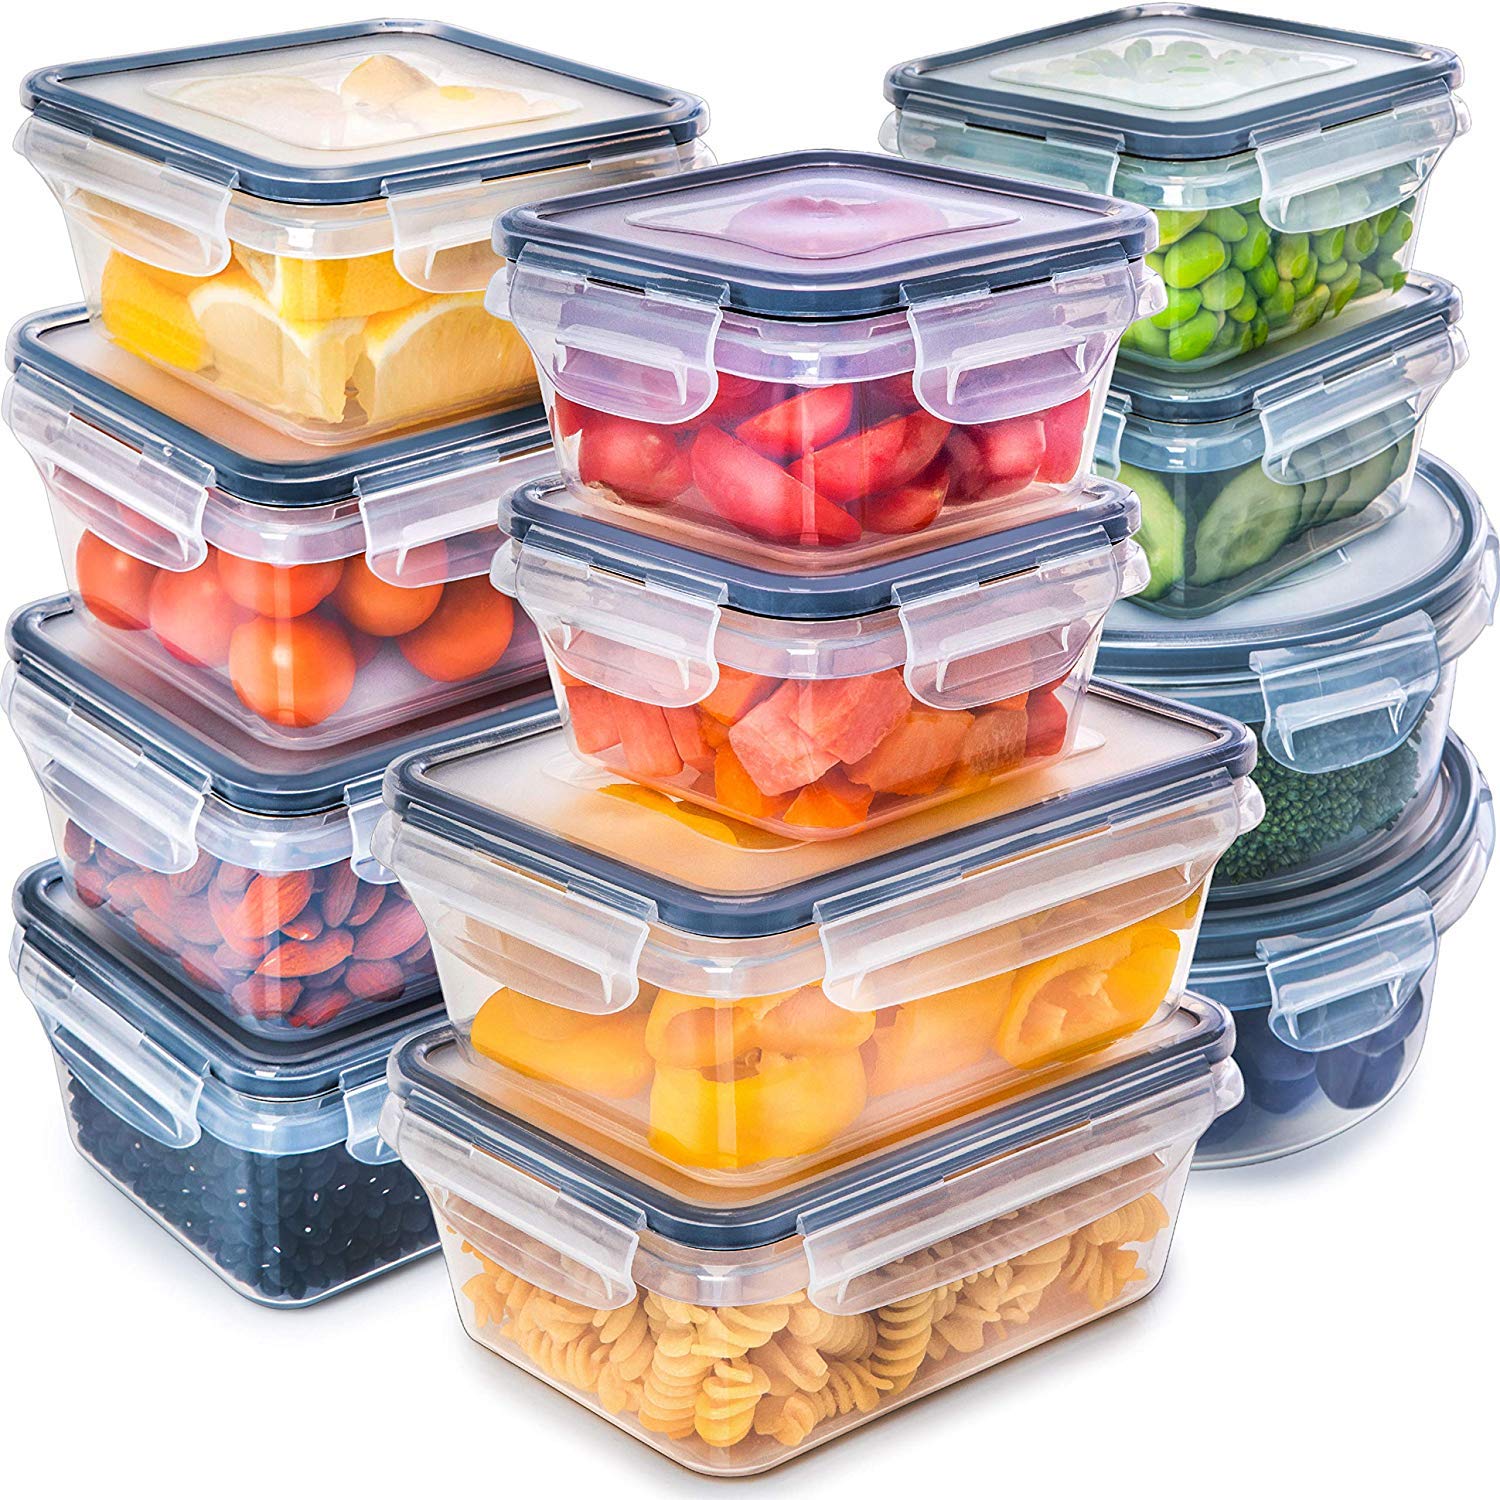 https://www.dontwasteyourmoney.com/wp-content/uploads/2020/01/fullstar-food-storage-containers-with-lids-set-of-12-food-storage-for-lunch.jpg